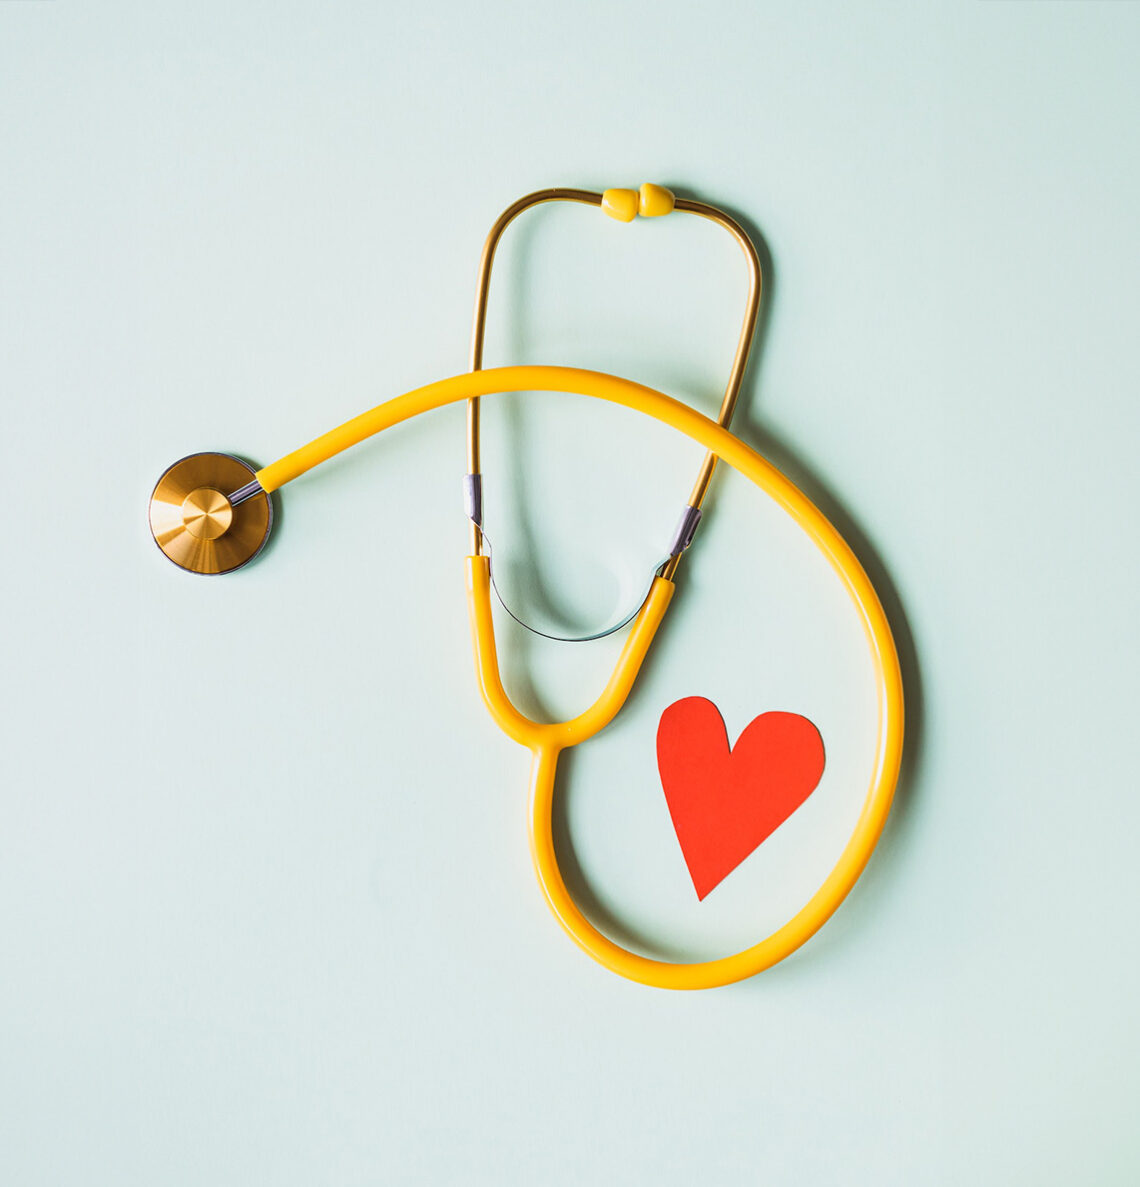 An artistic photograph of a stethoscope and a red heart